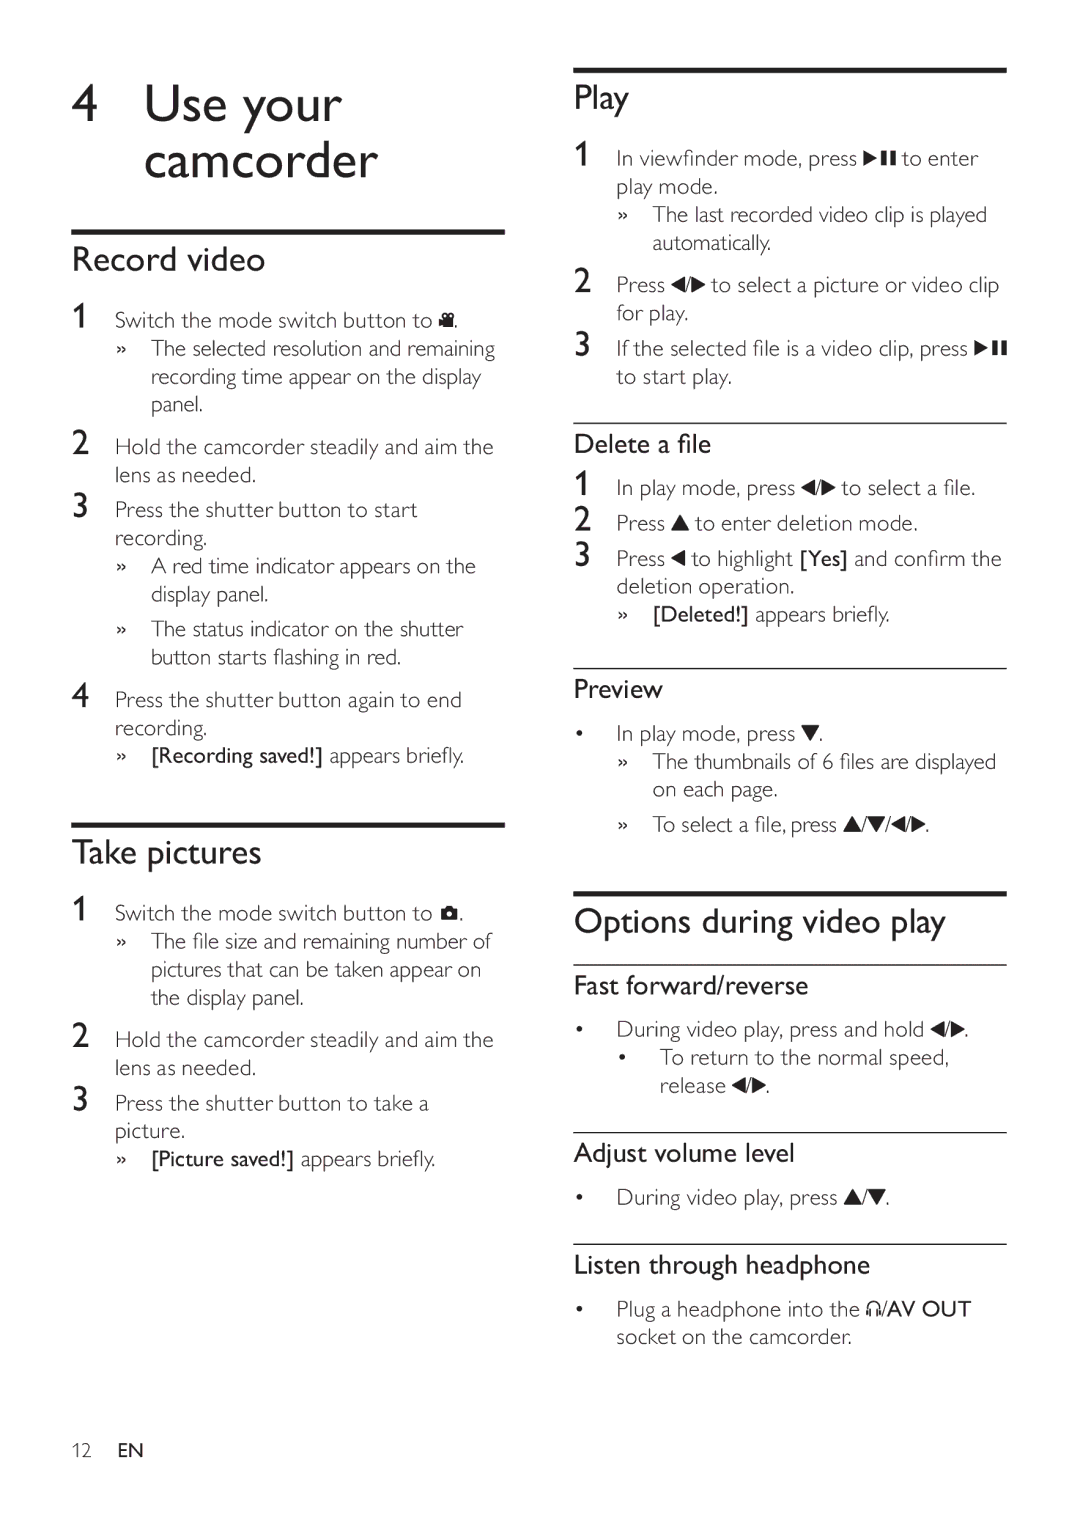 Philips CAM100GY/37 user manual Record video, Take pictures, Play, Options during video play 